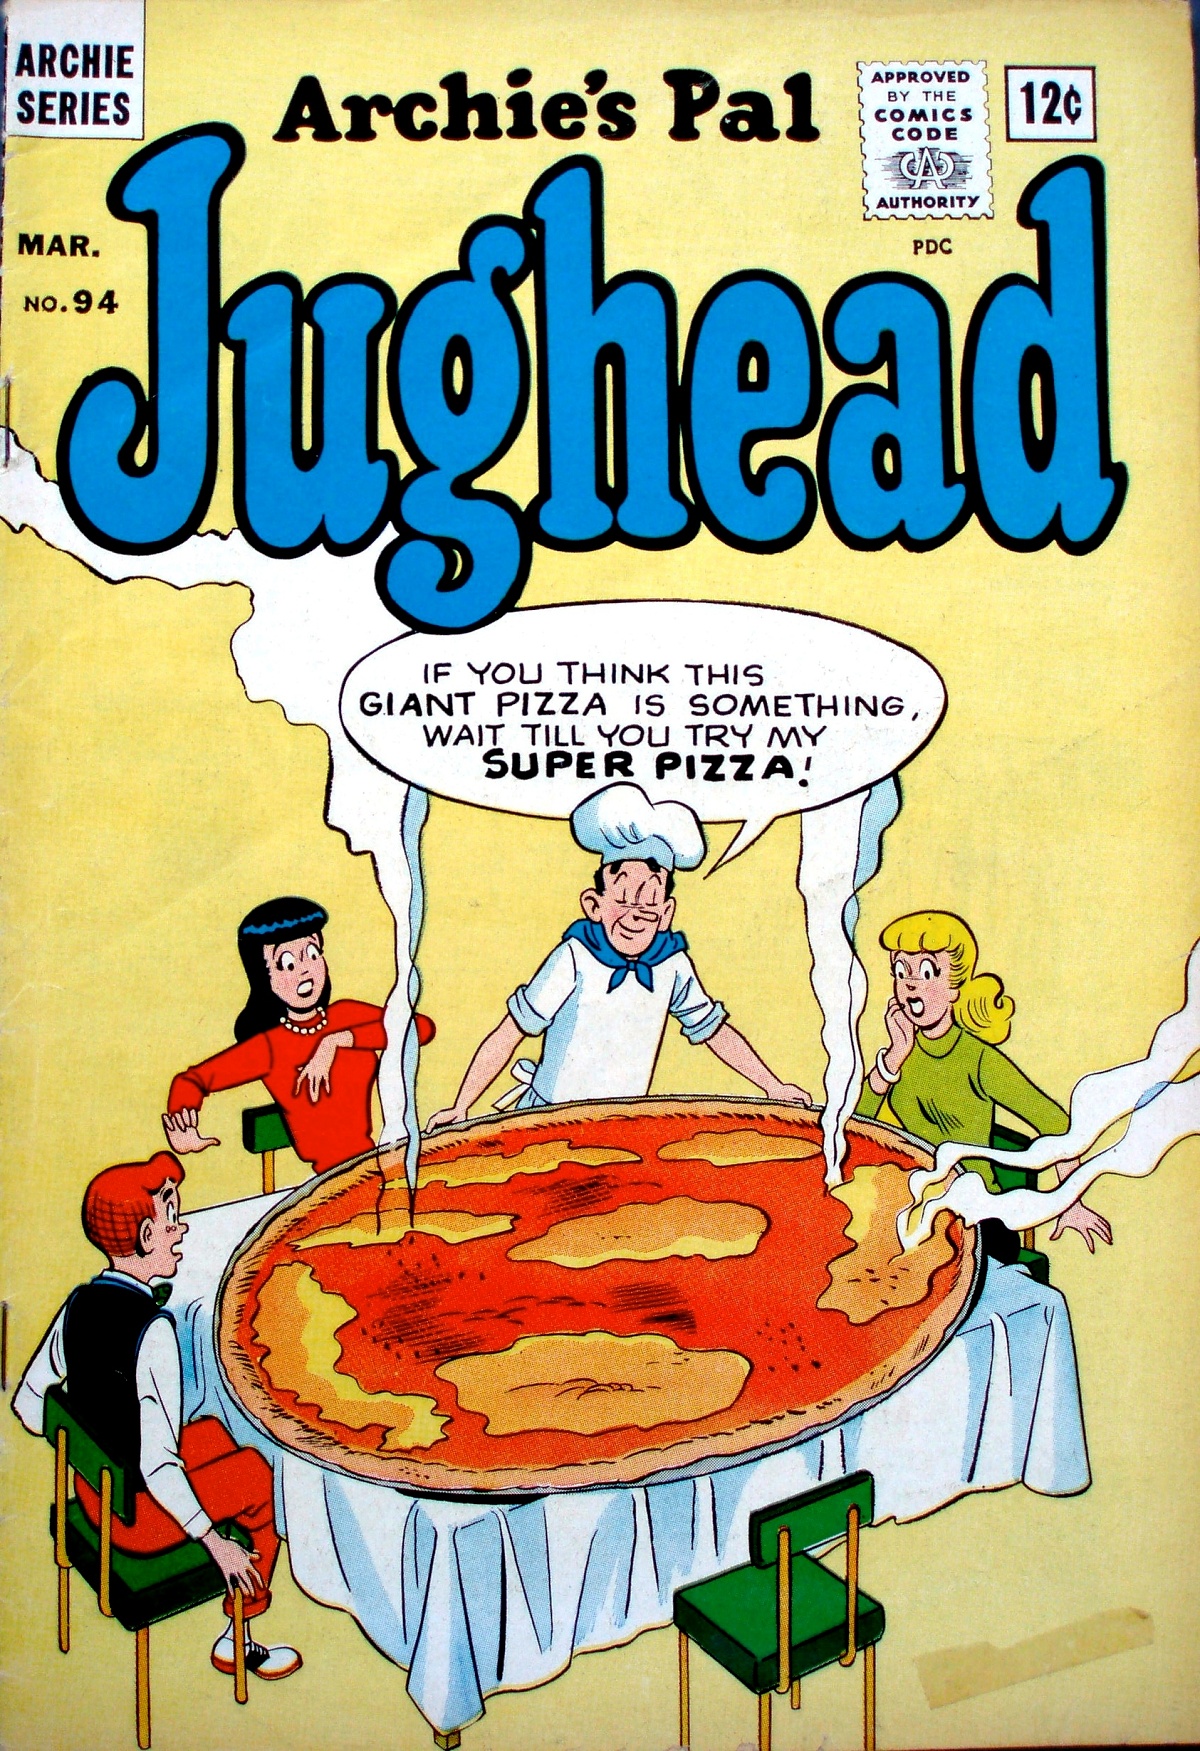 Archie S Pal Jughead Issue 94 | Read Archie S Pal Jughead Issue 94 comic  online in high quality. Read Full Comic online for free - Read comics  online in high quality .| READ COMIC ONLINE